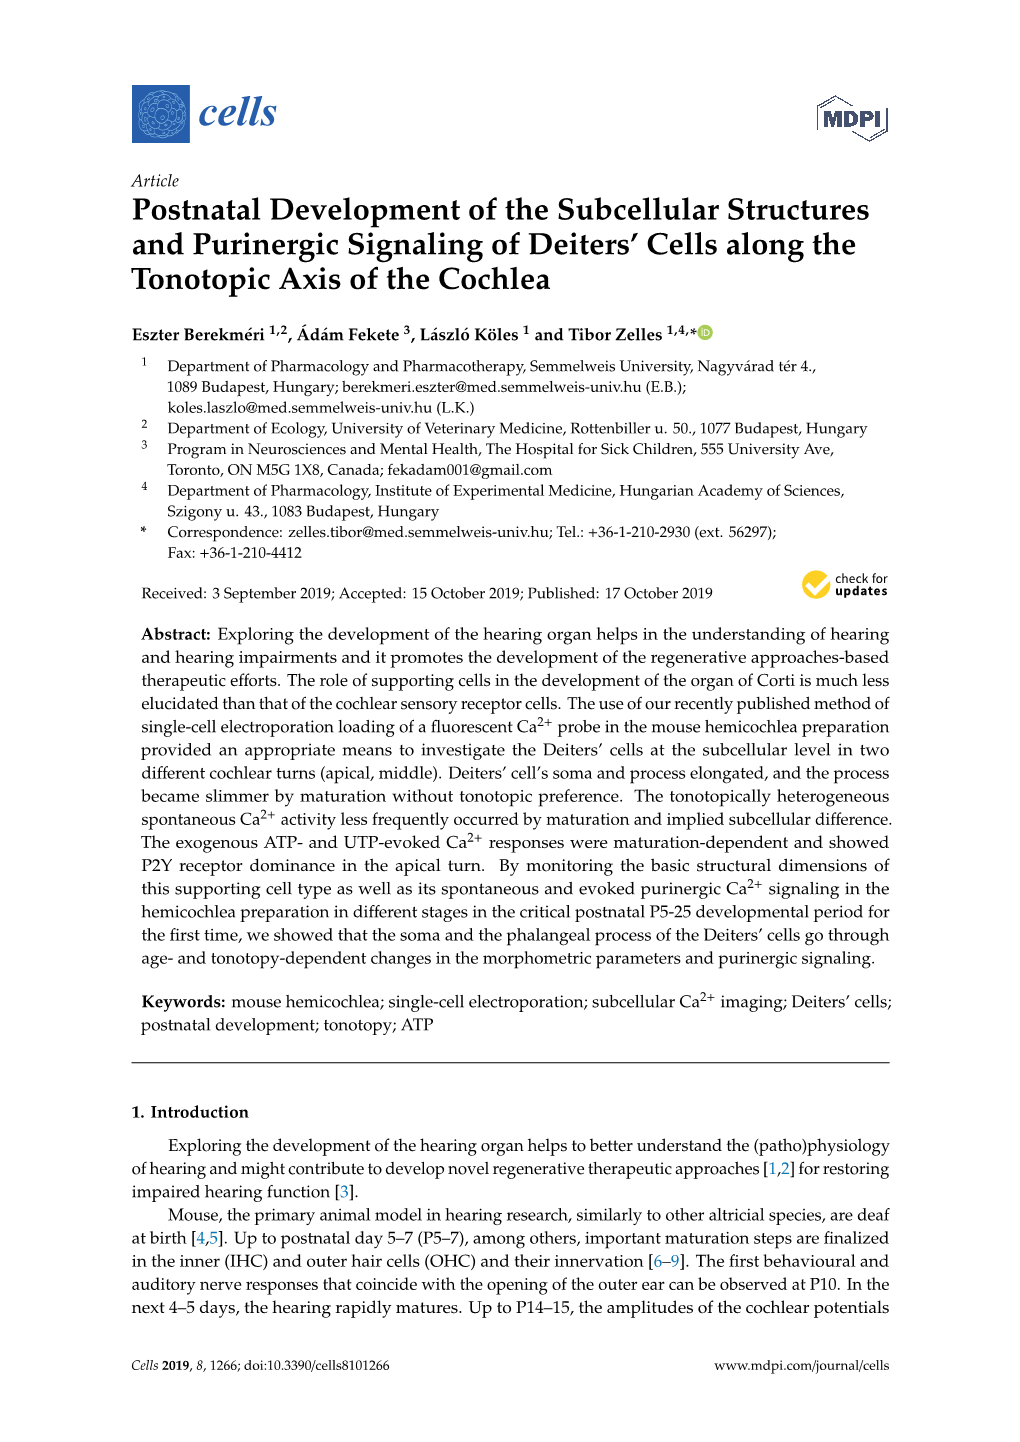 Postnatal Development of the Subcellular Structures and Purinergic Signaling of Deiters’ Cells Along the Tonotopic Axis of the Cochlea